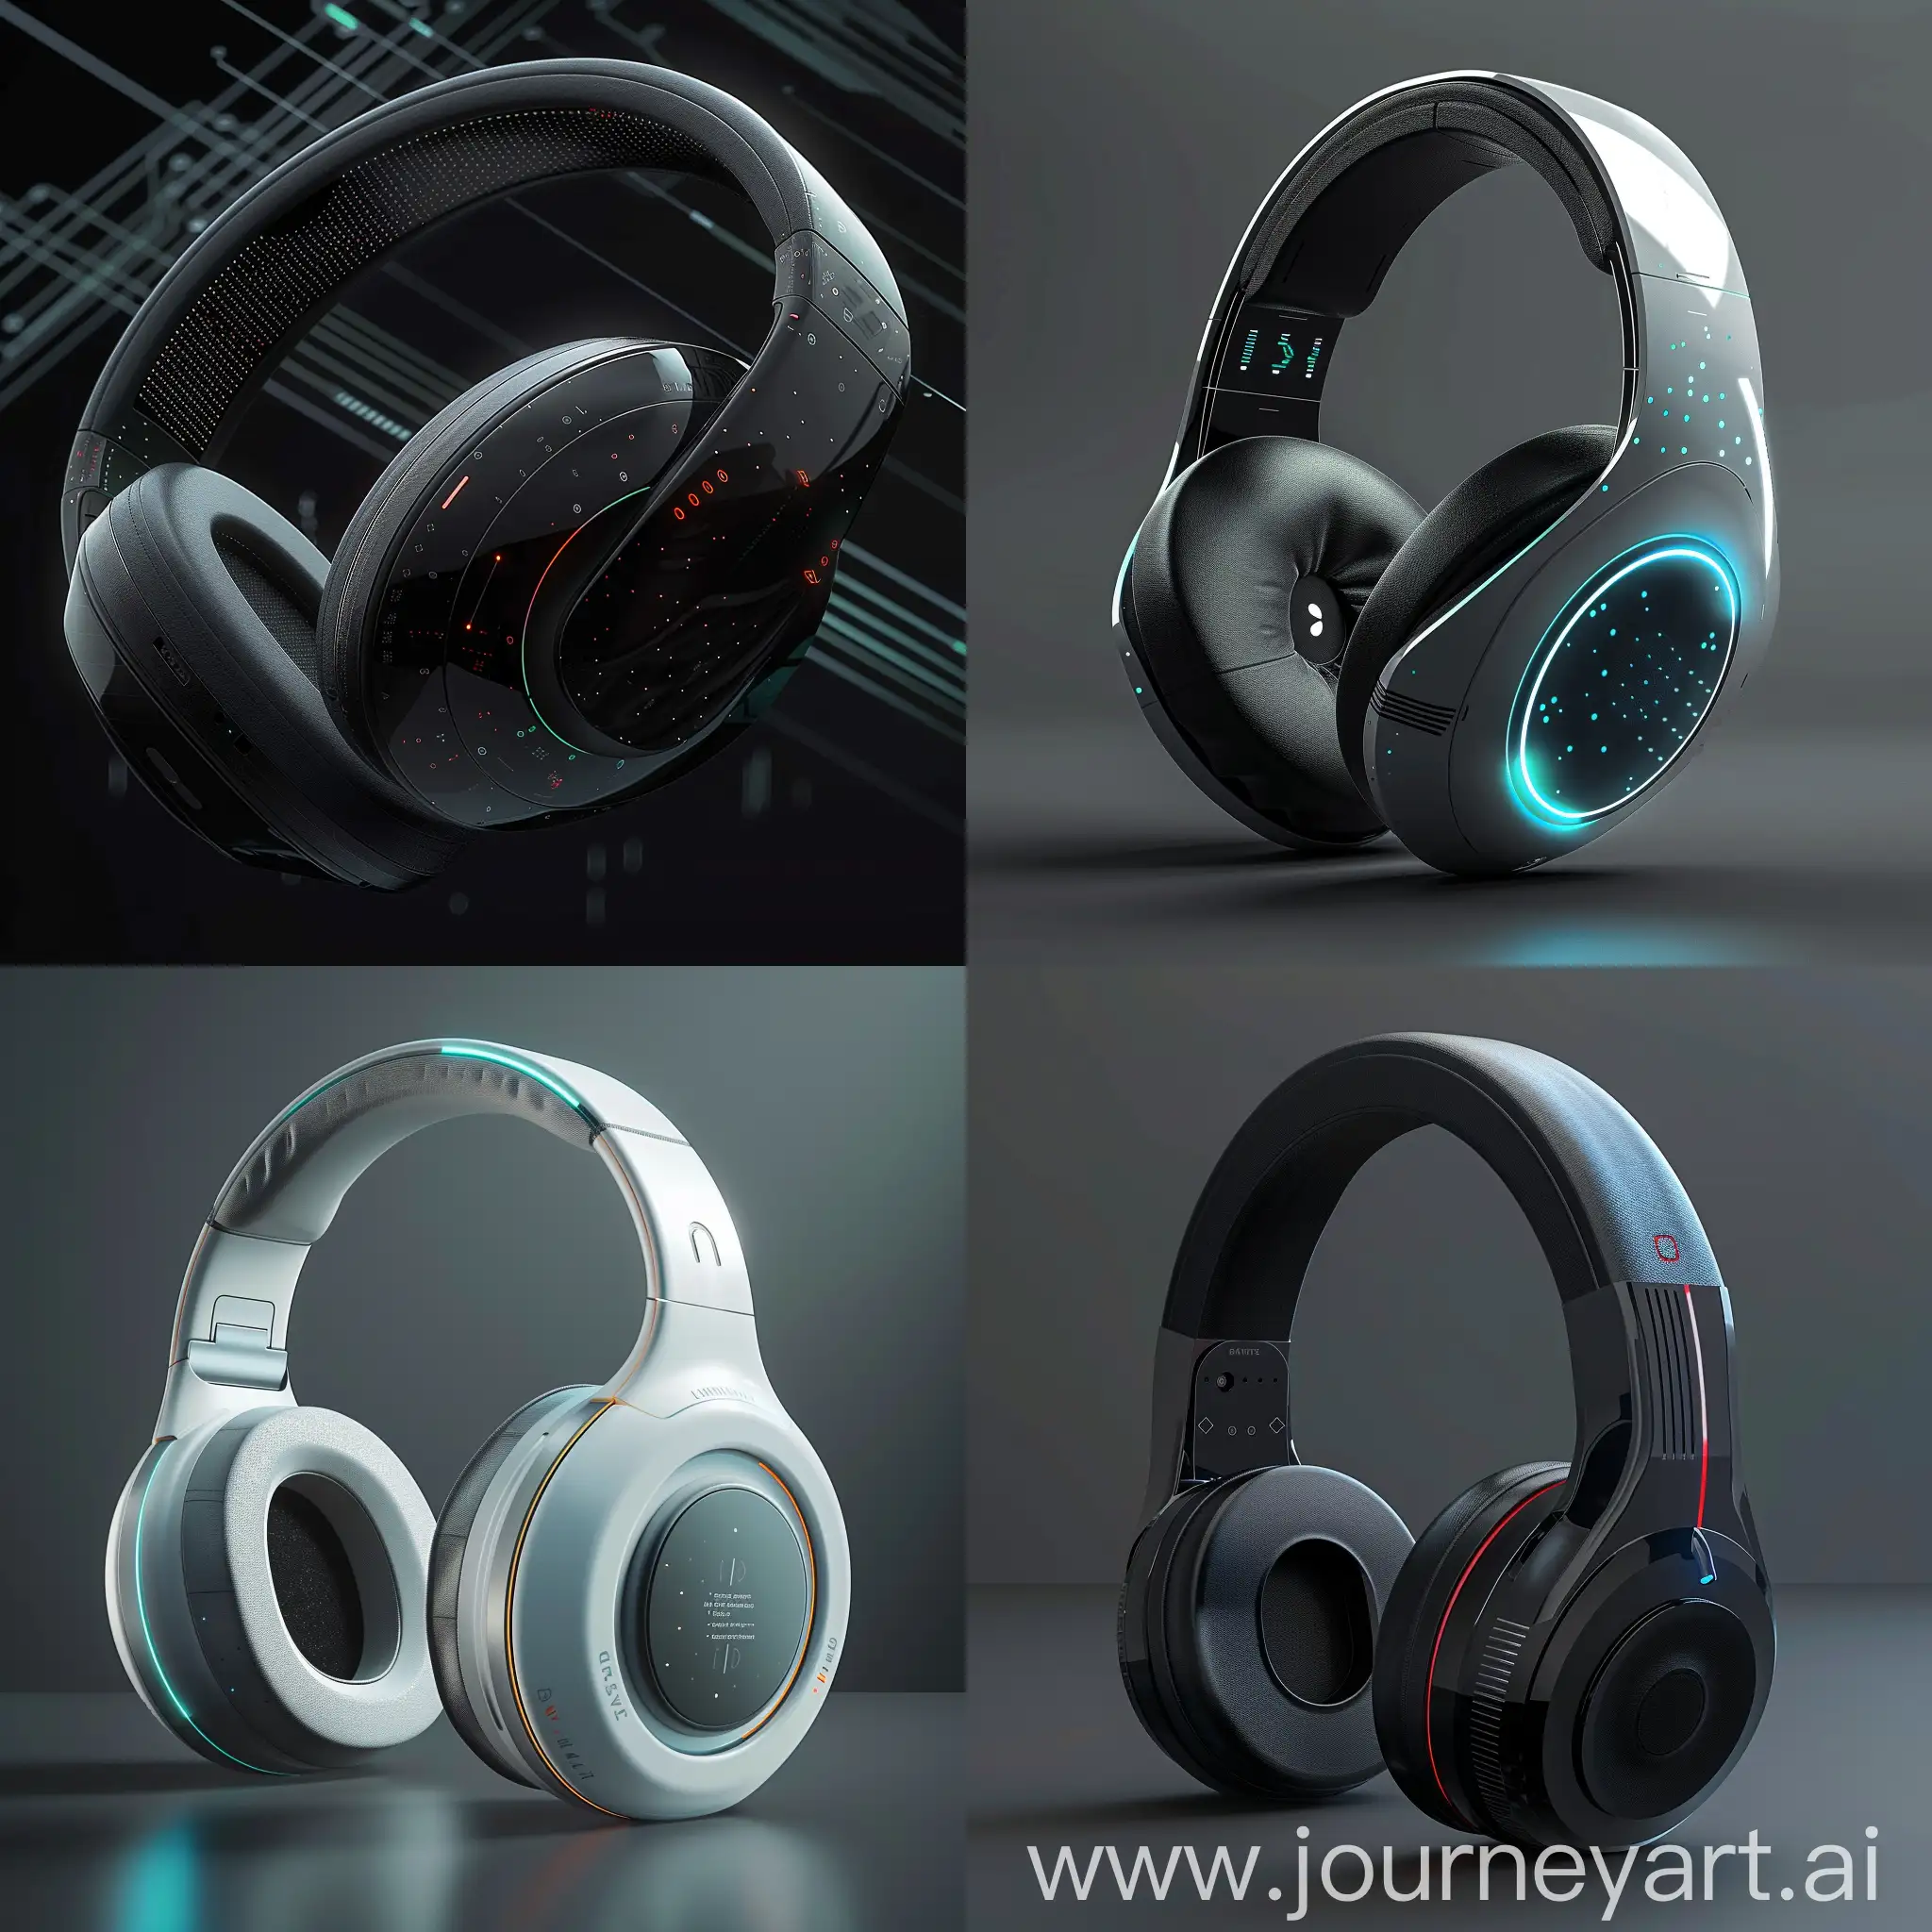 Advanced-SciFi-PC-Headphones-with-AI-Voice-Assistant-and-EcoFriendly-Design